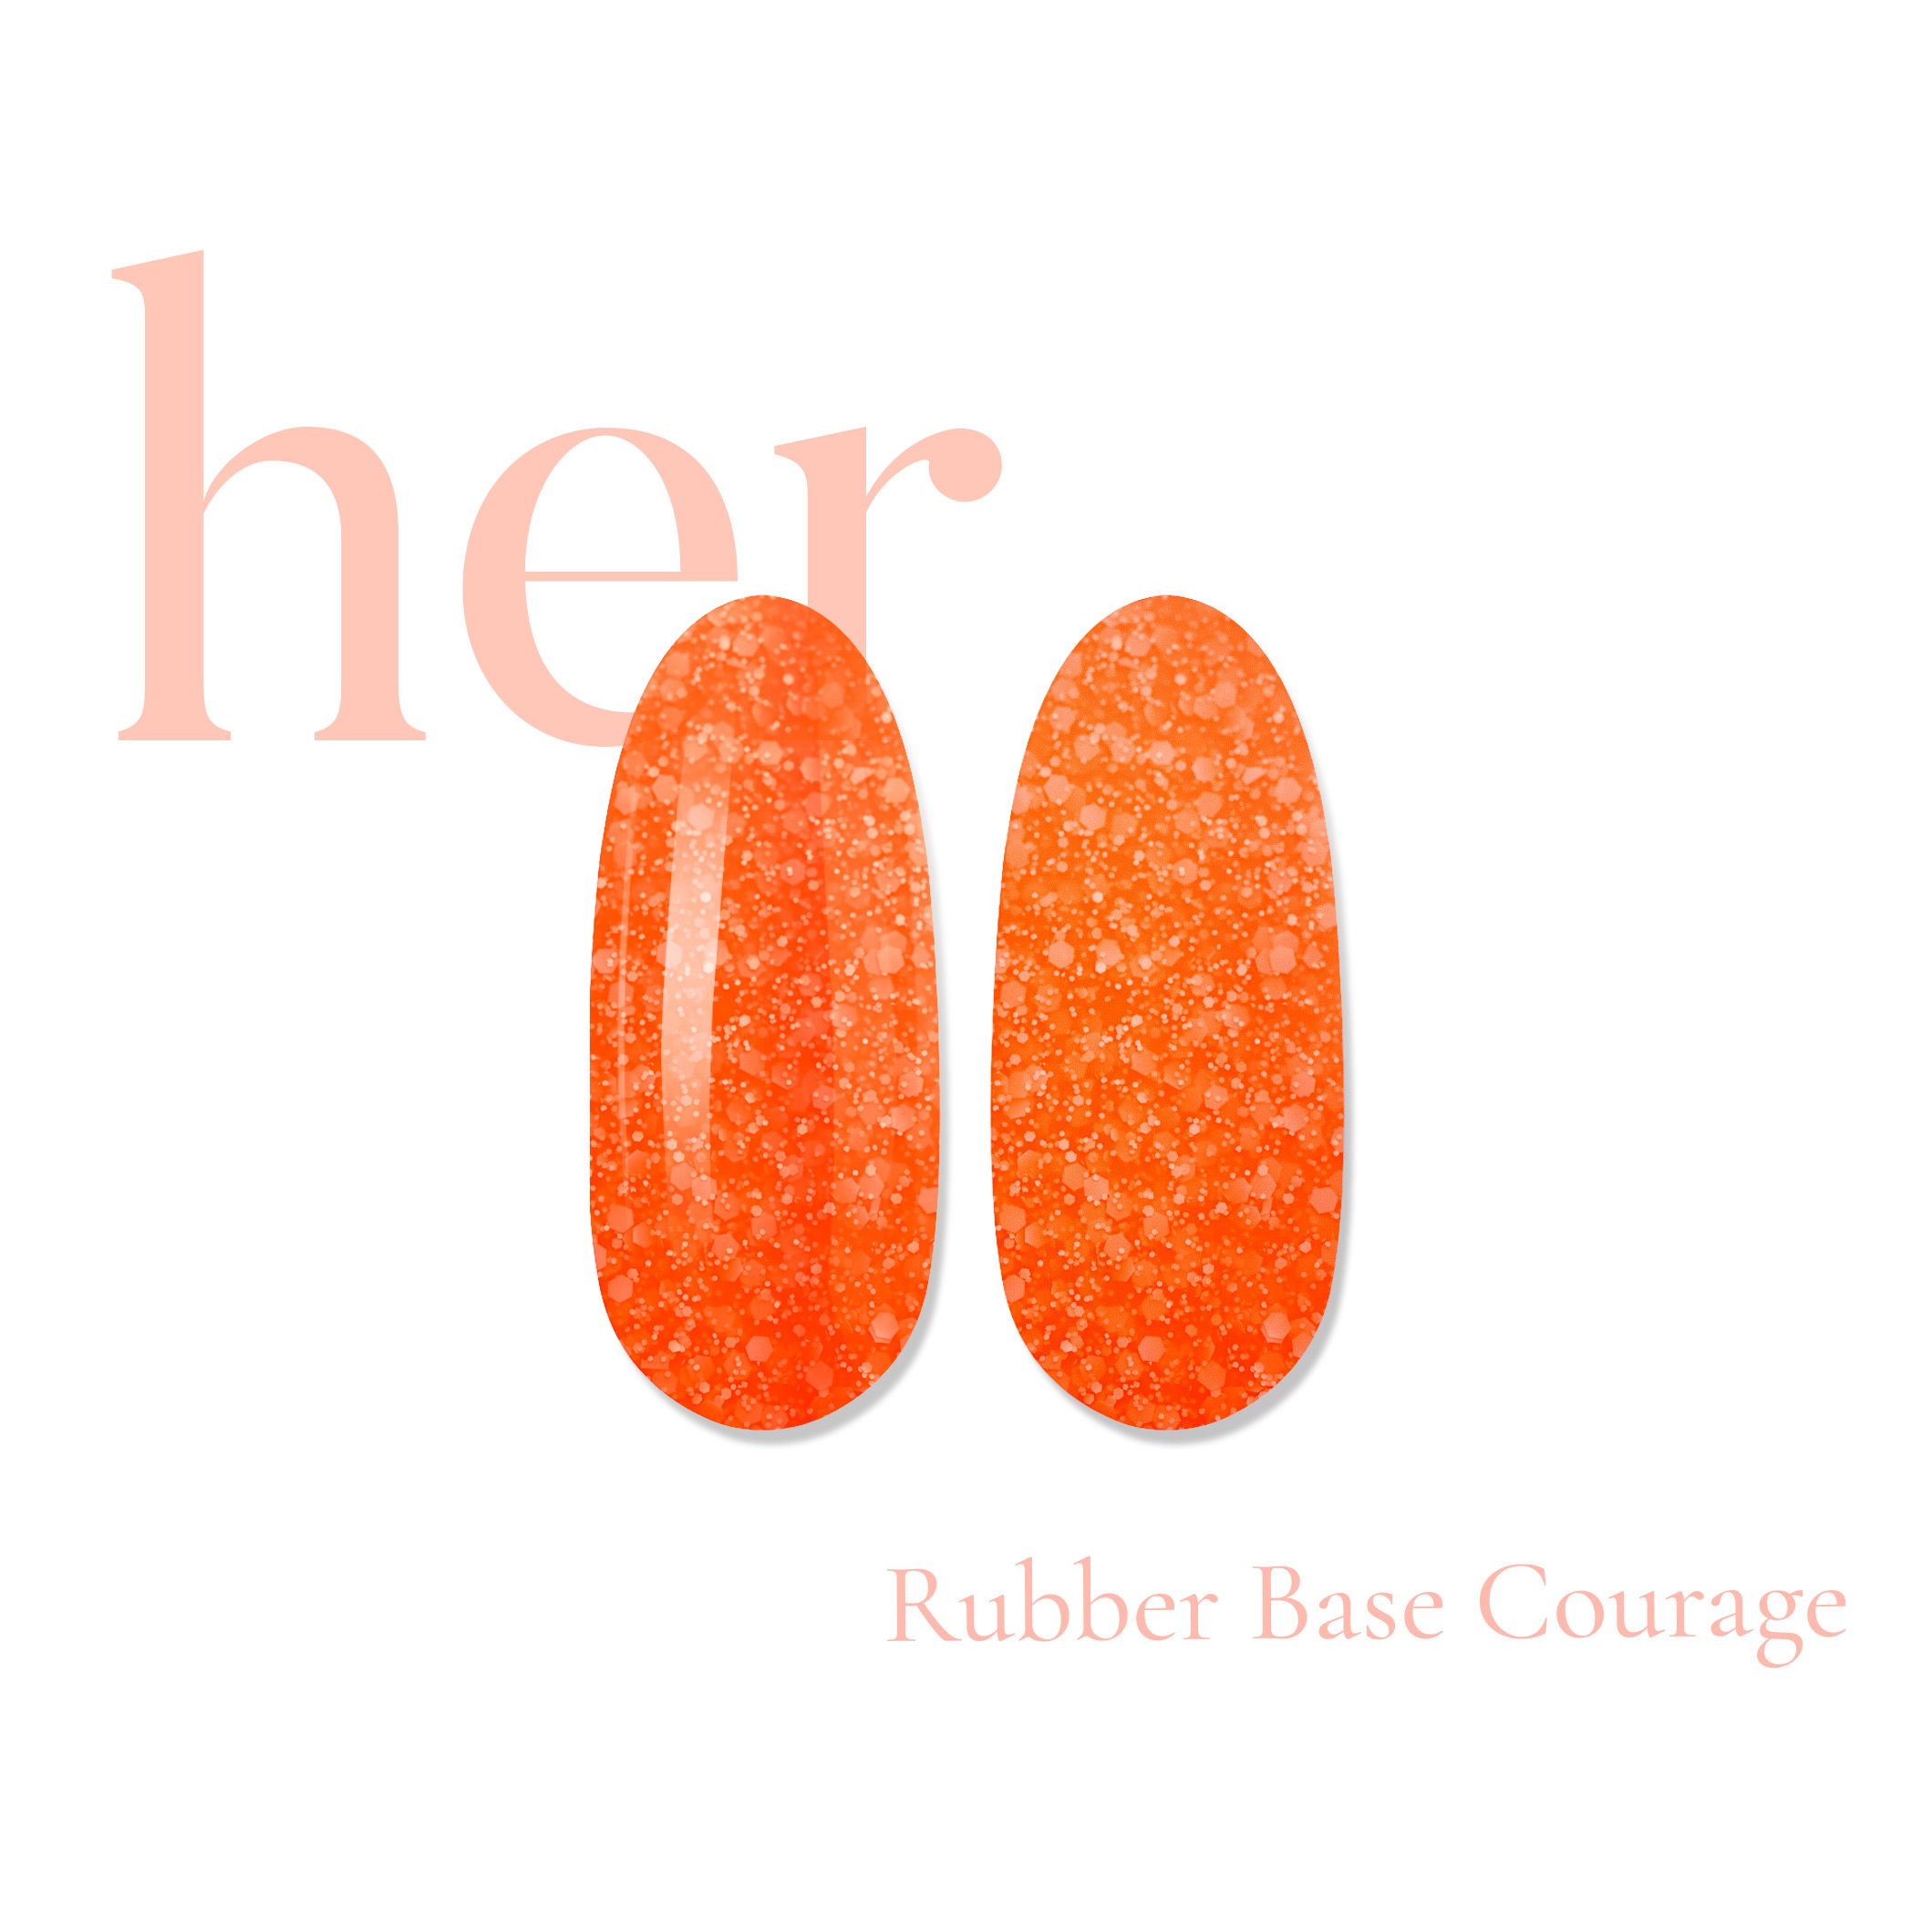 Rubber Base COURAGE